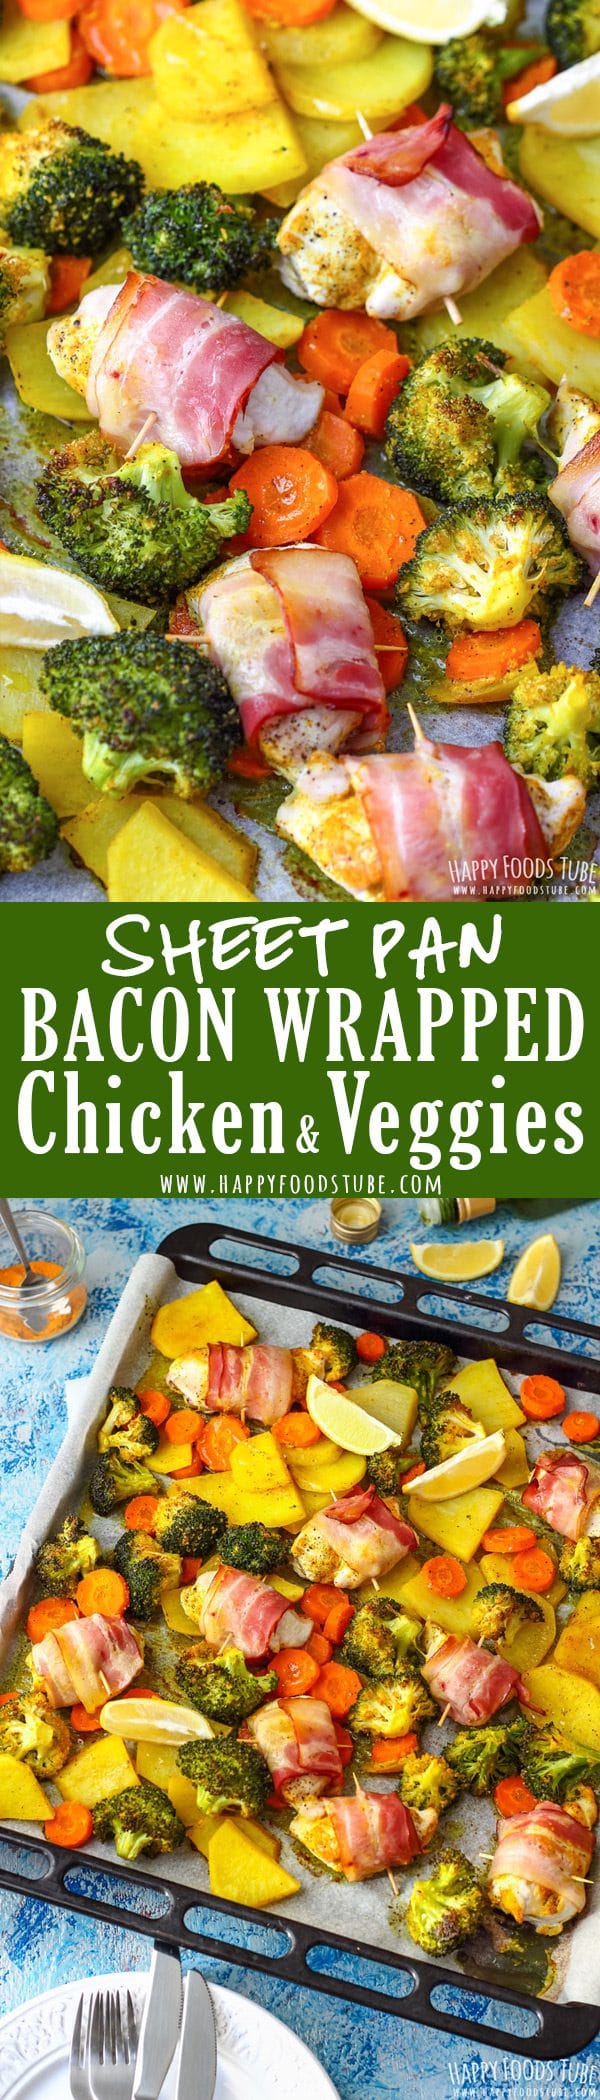 Sheet Pan Bacon Wrapped Chicken & Veggies Collage Picture